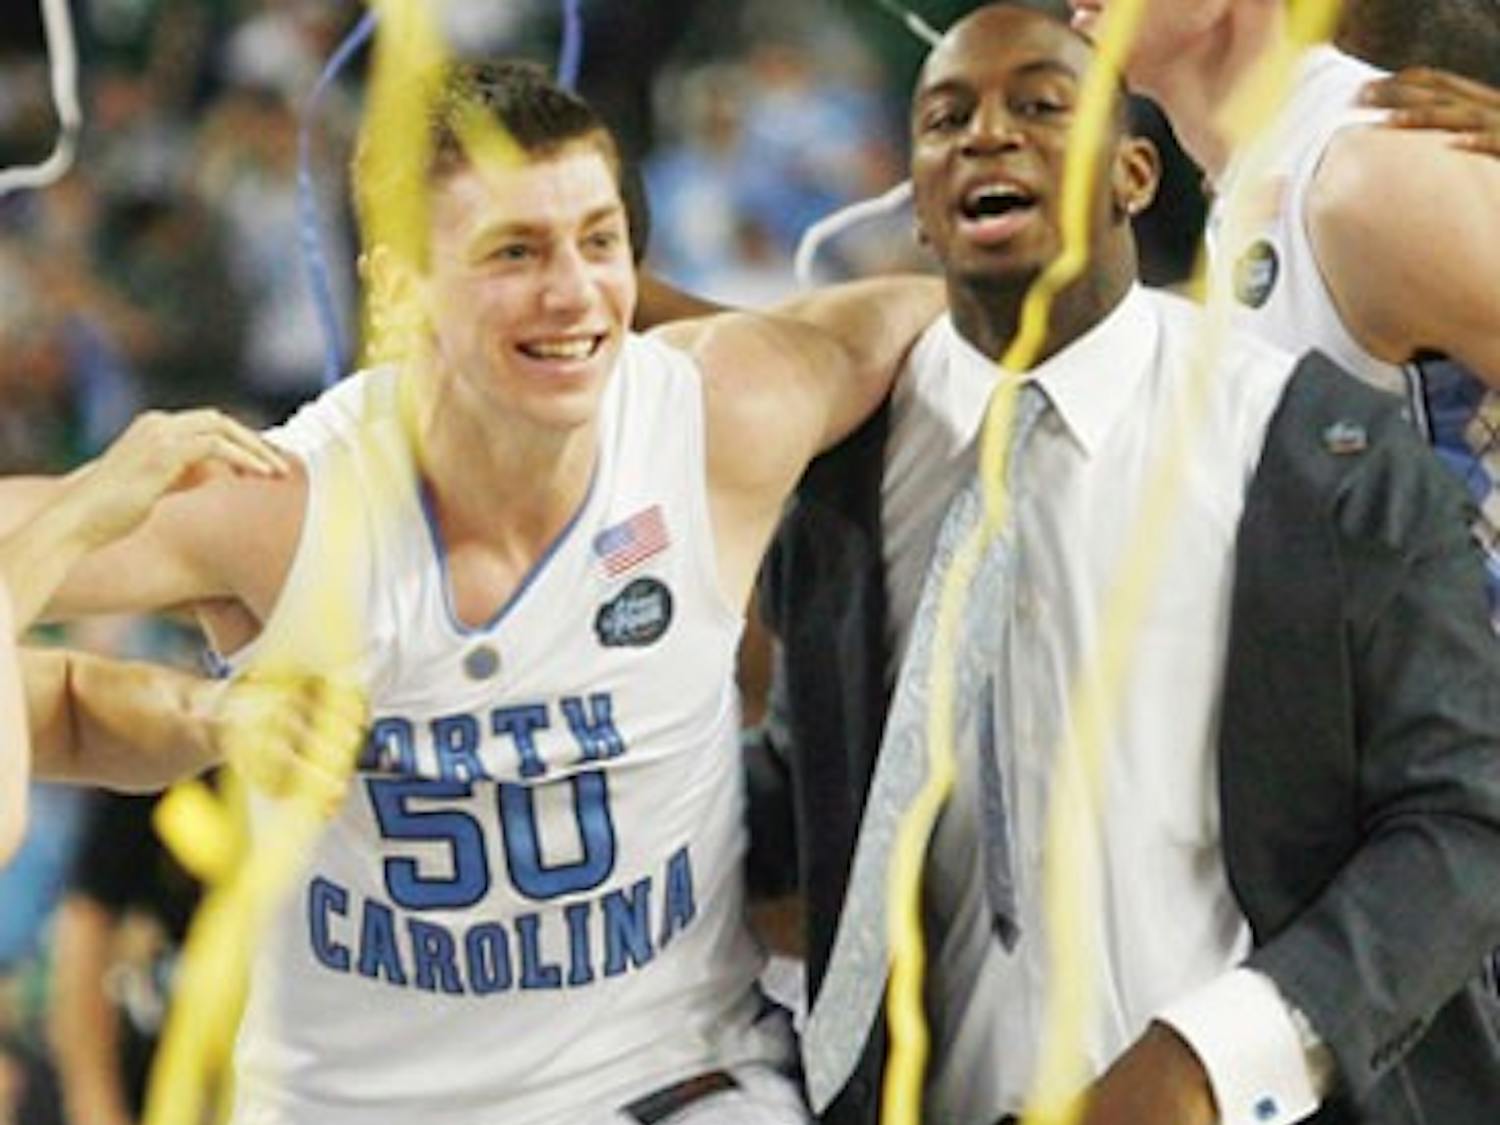 Tyler Hansbrough contributed 18 points as UNC defeated Michigan State, 89-72, for the 2009 national title. DTH File Photo